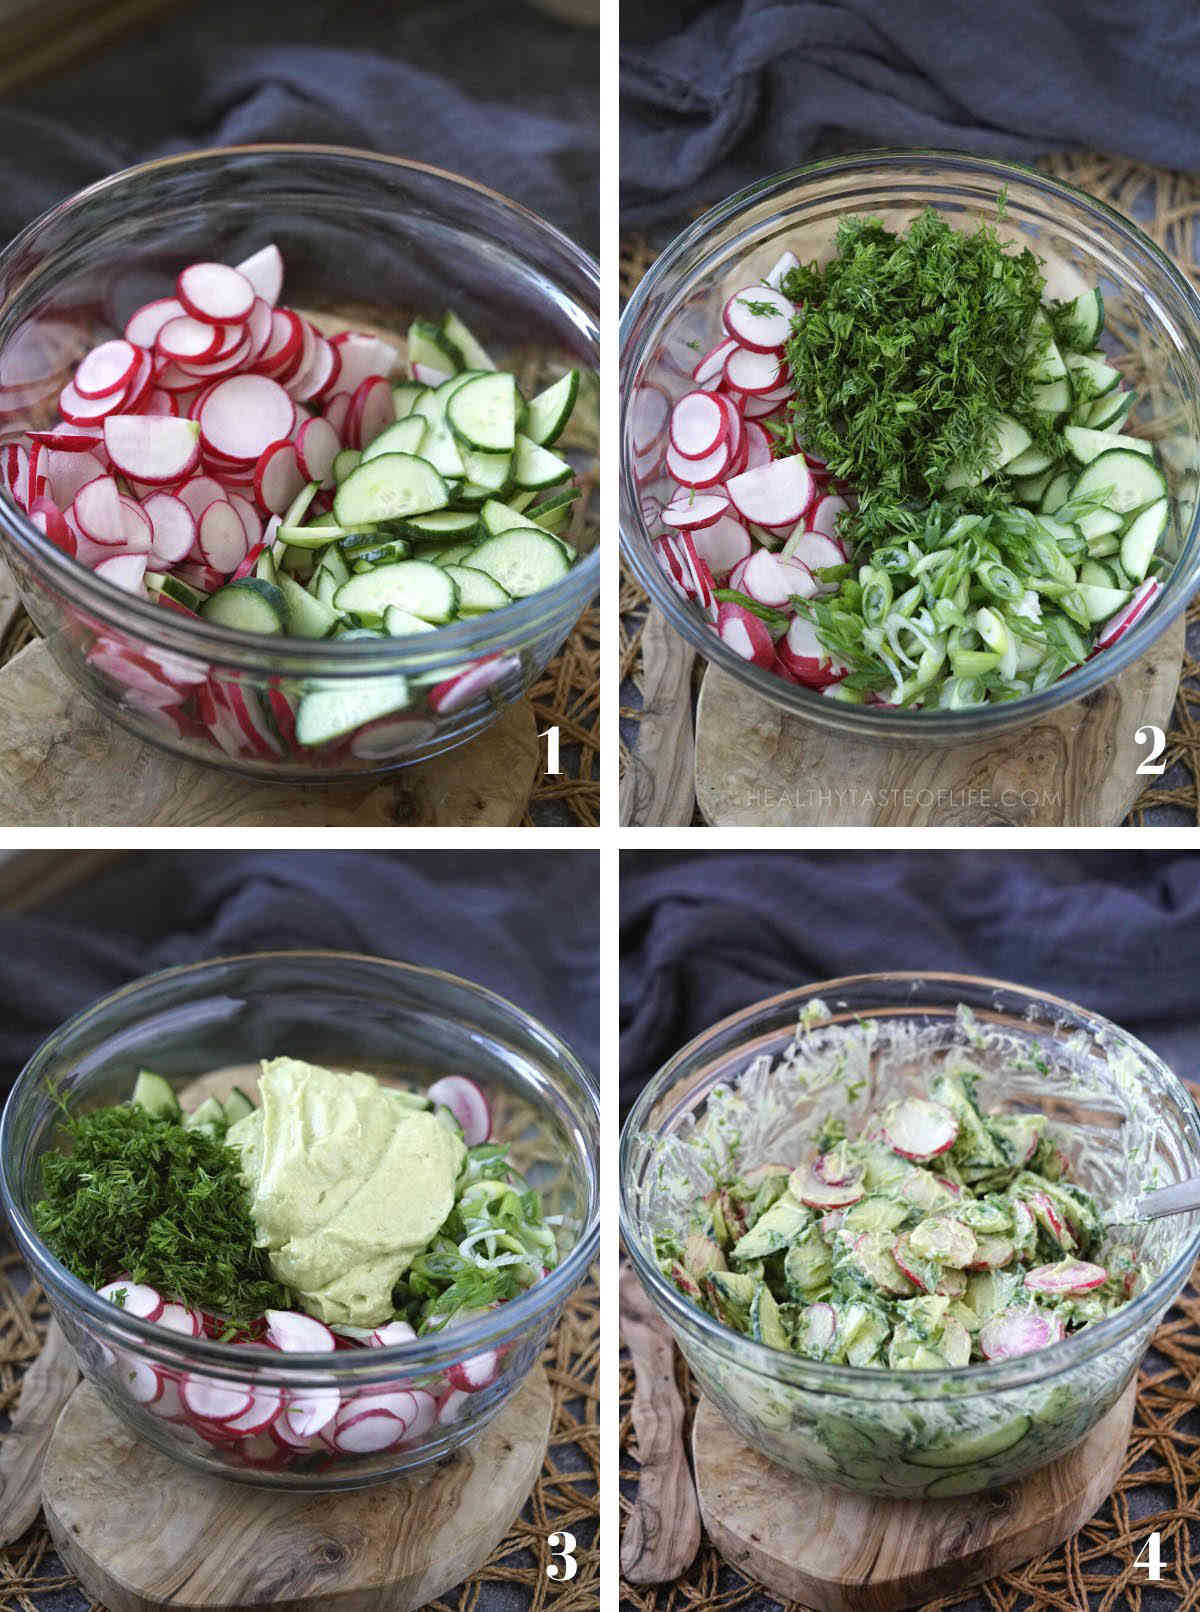 Step by step process images showing how to make a radish cucumber salad from scratch with homemade creamy dressing with a healthy twist.